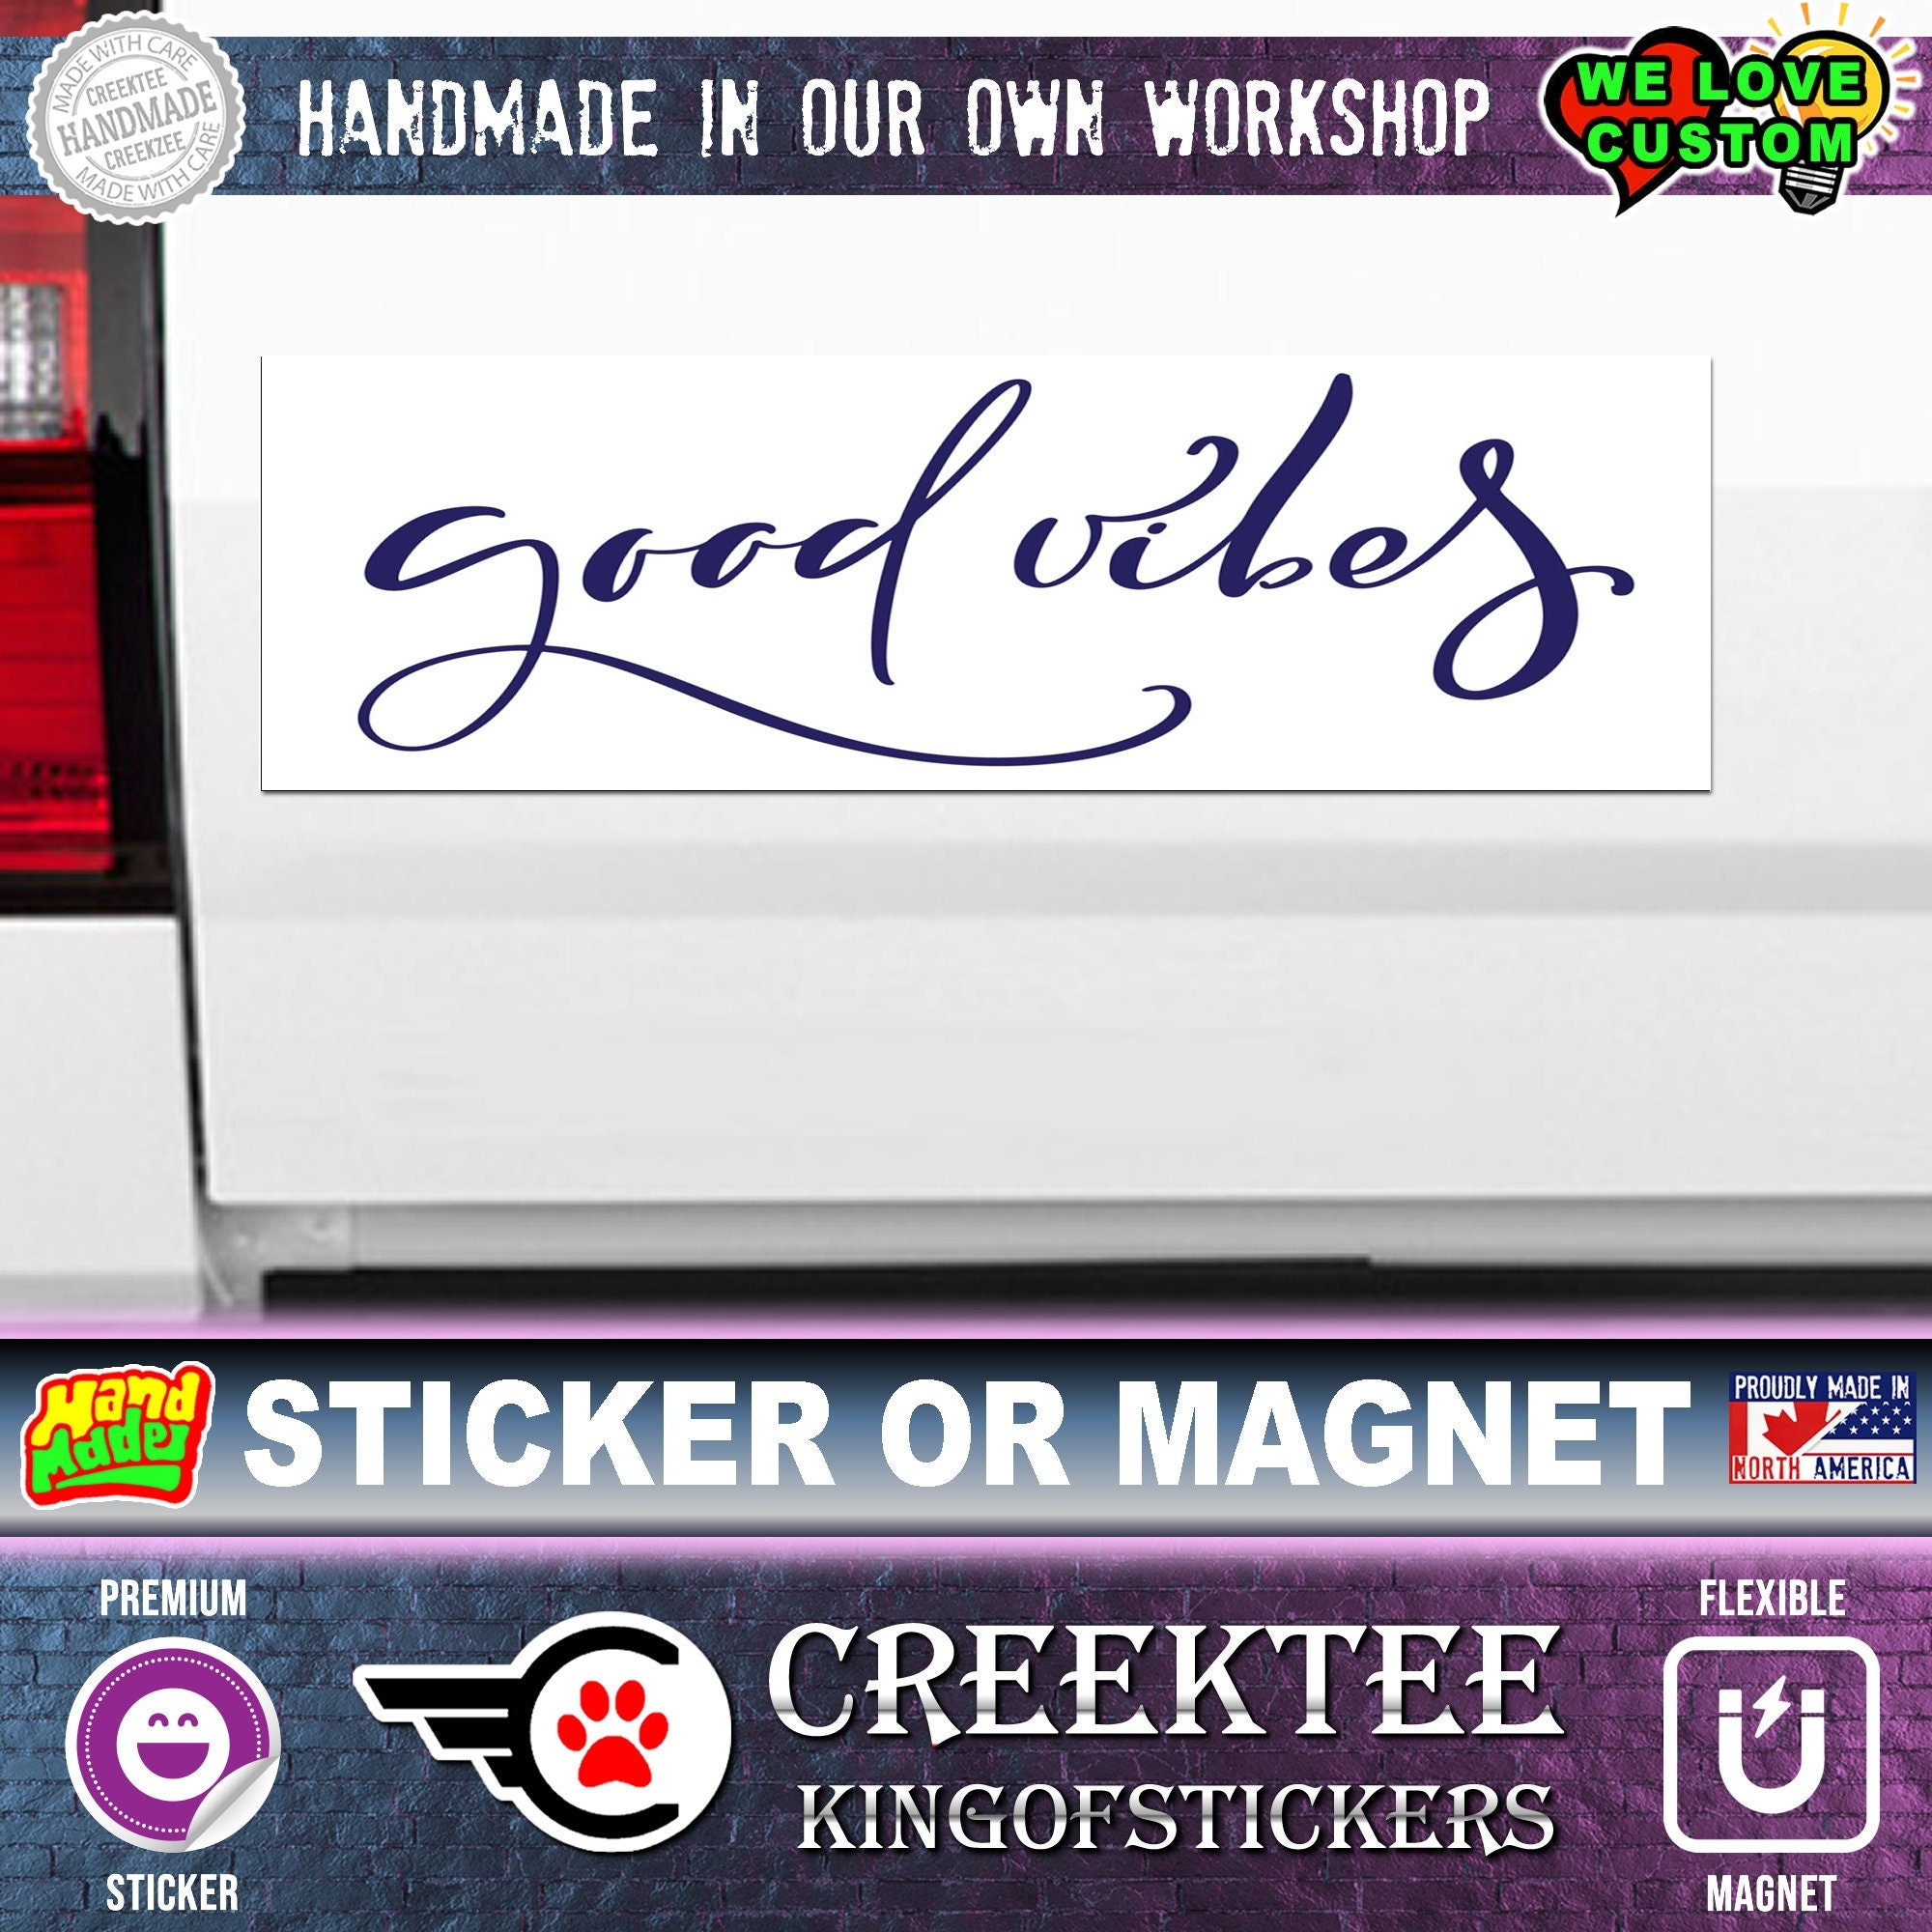 Good Vibes Bumper Sticker or Magnet in various sizes, full color with UV laminate coating